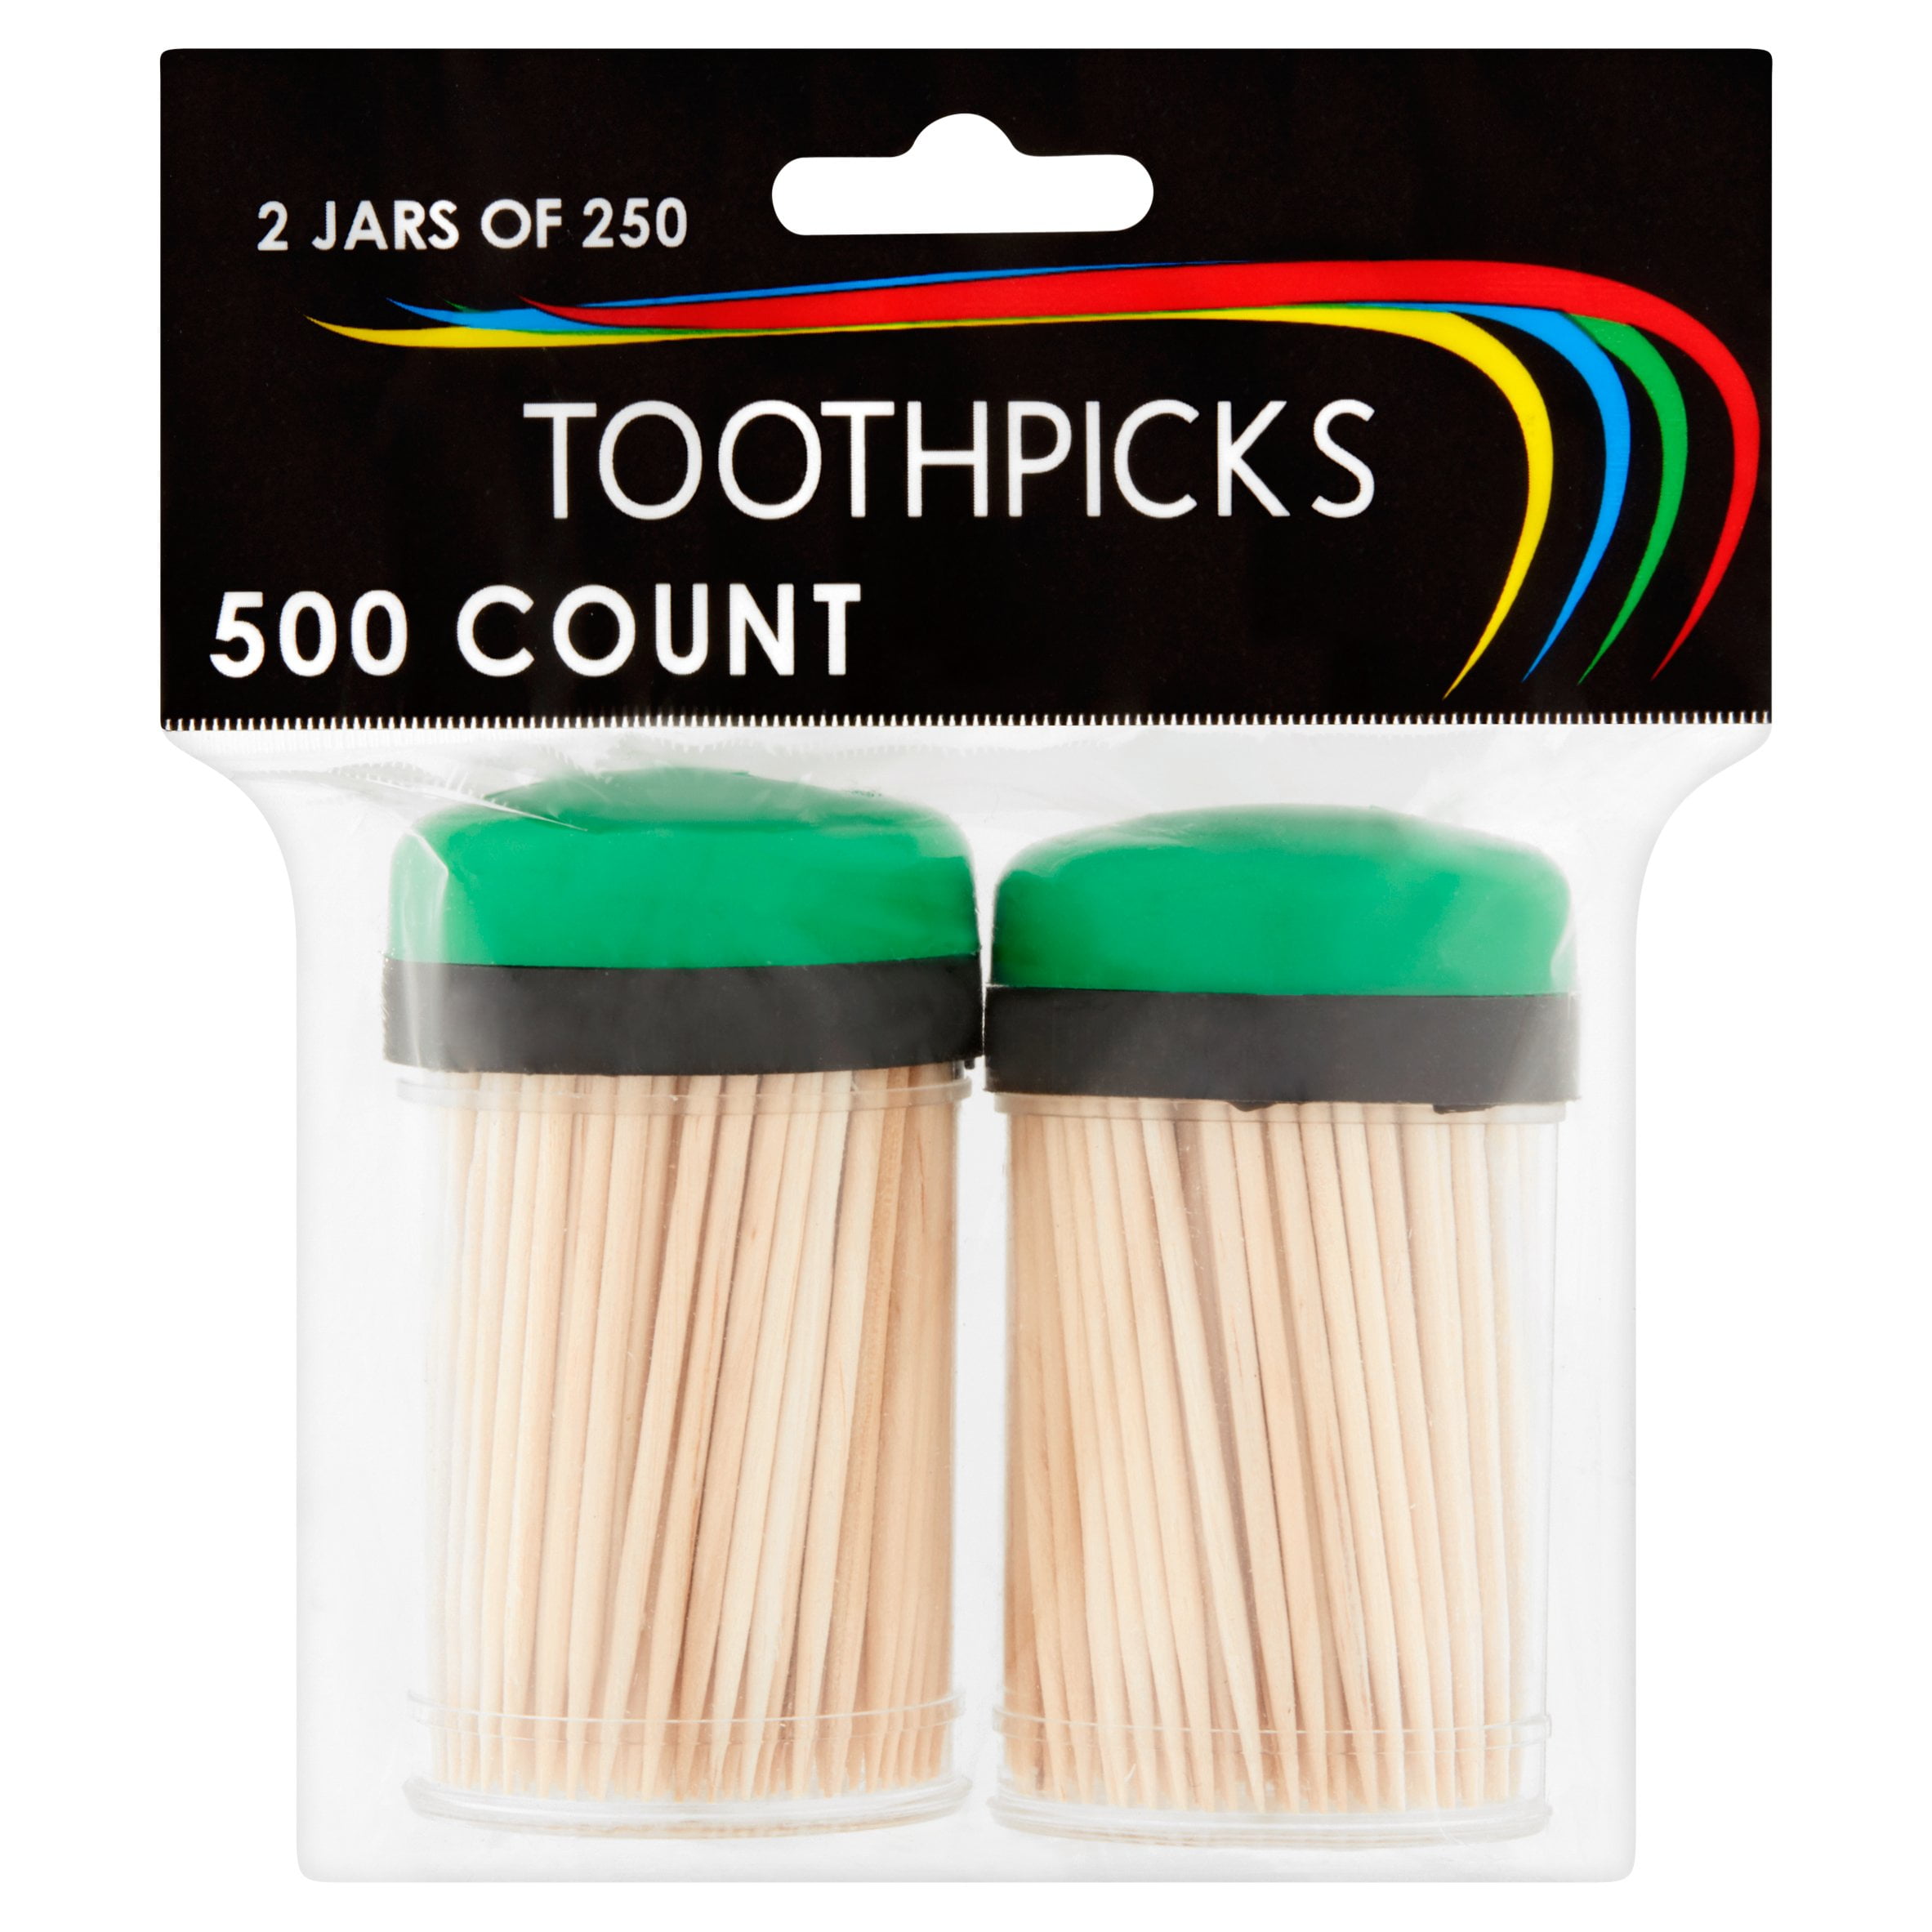 2x Royal Square Toothpicks 800 Count Boxes for sale online 1600 Total 